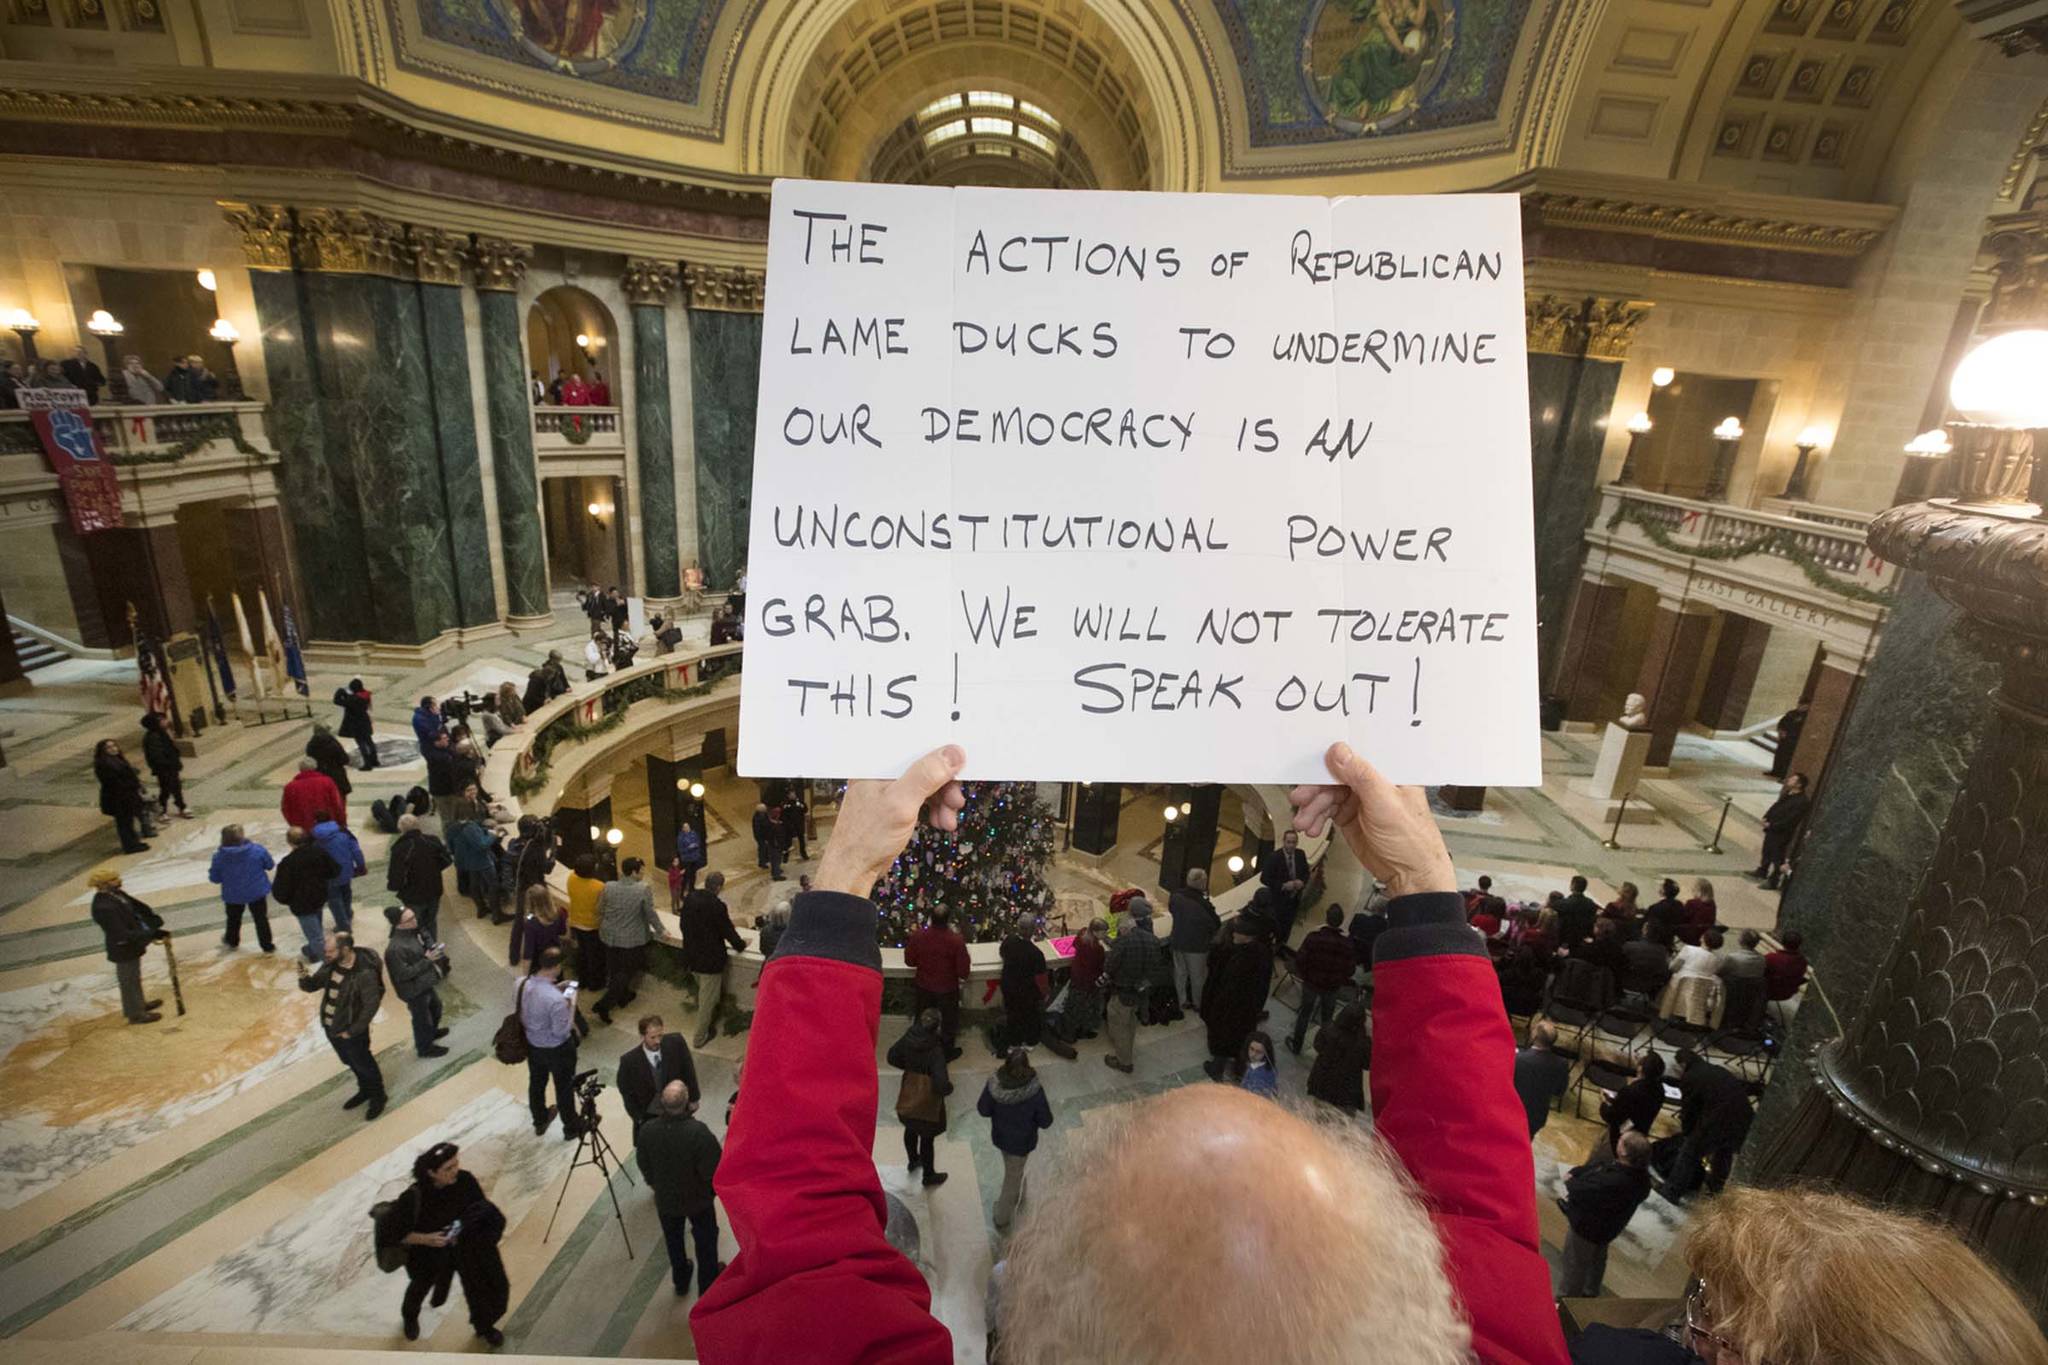 People protest the legislature’s extraordinary session during the official Christmas tree lighting ceremony at the Capitol in Madison, Wisconsin on Tuesday, Dec. 4, 2018. Demonstrators booed outgoing Wisconsin Gov. Scott Walker on Tuesday during the Christmas tree-lighting ceremony, at times drowning out a high school choir with their own songs in protest of a Republican effort to gut the powers of his Democratic successor. (Mark Hoffman | Milwaukee Journal-Sentinel)